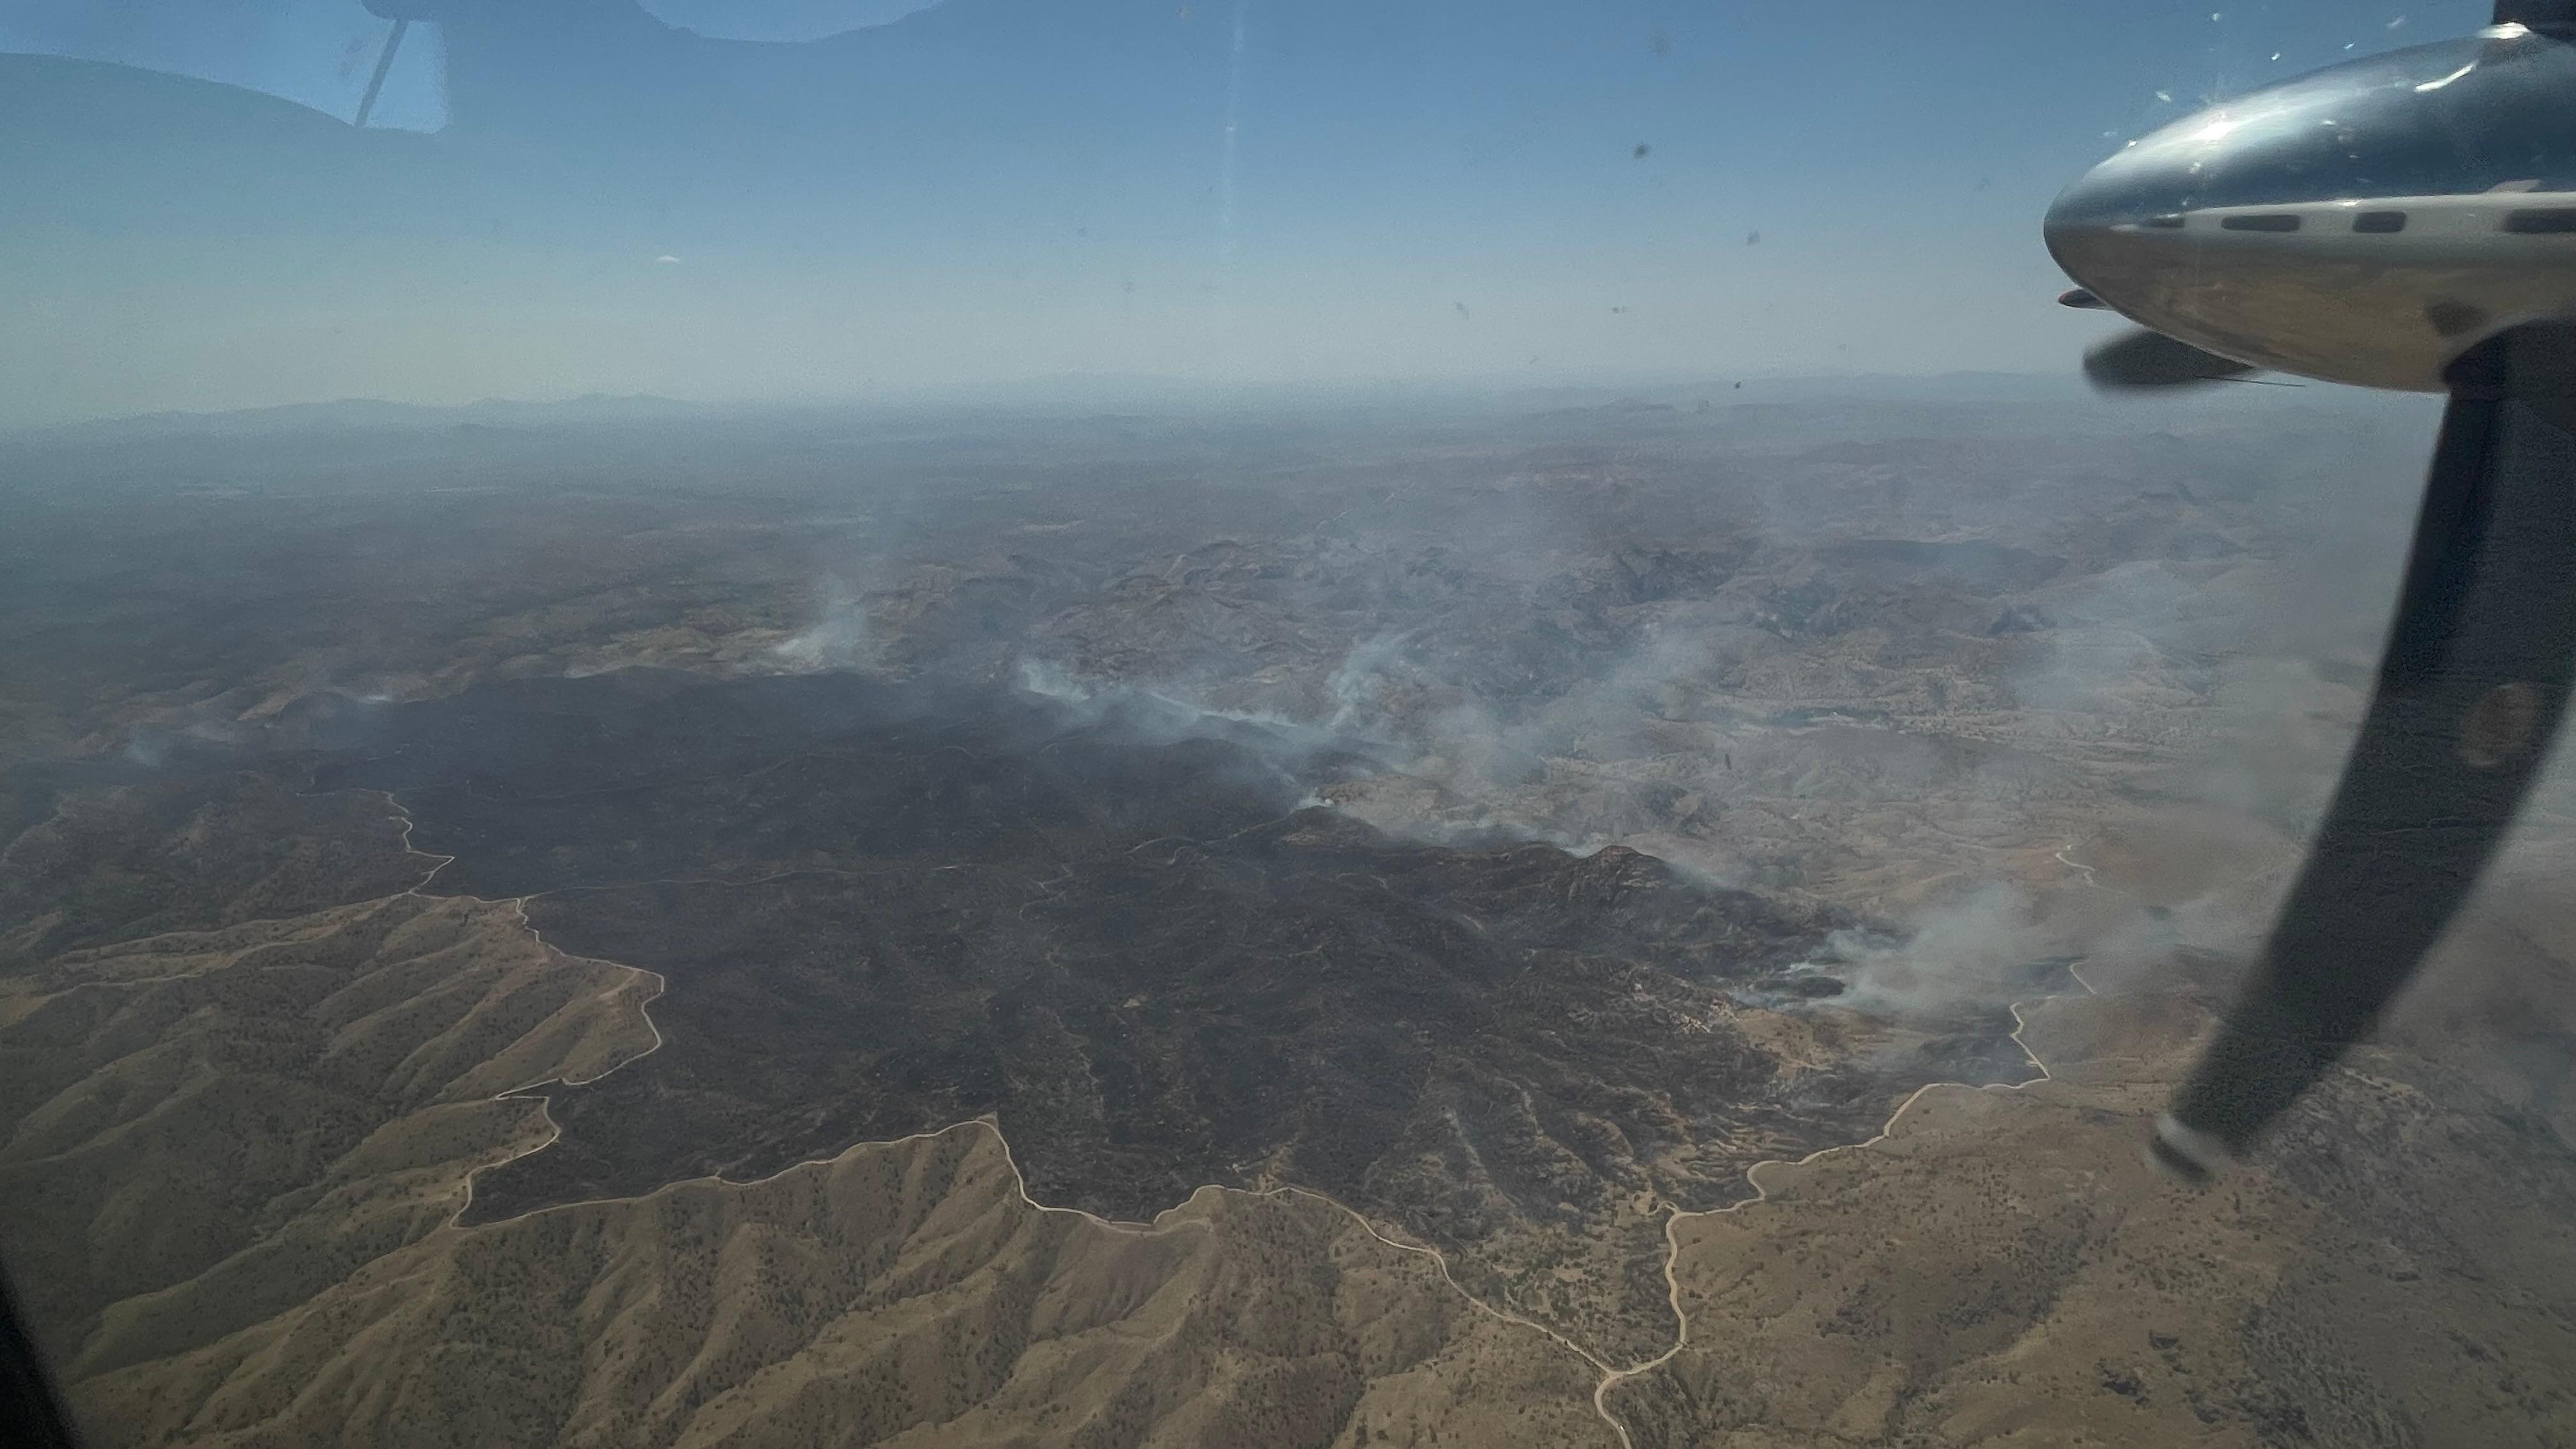 Photo from the Tonto Canyon Fire 6/13